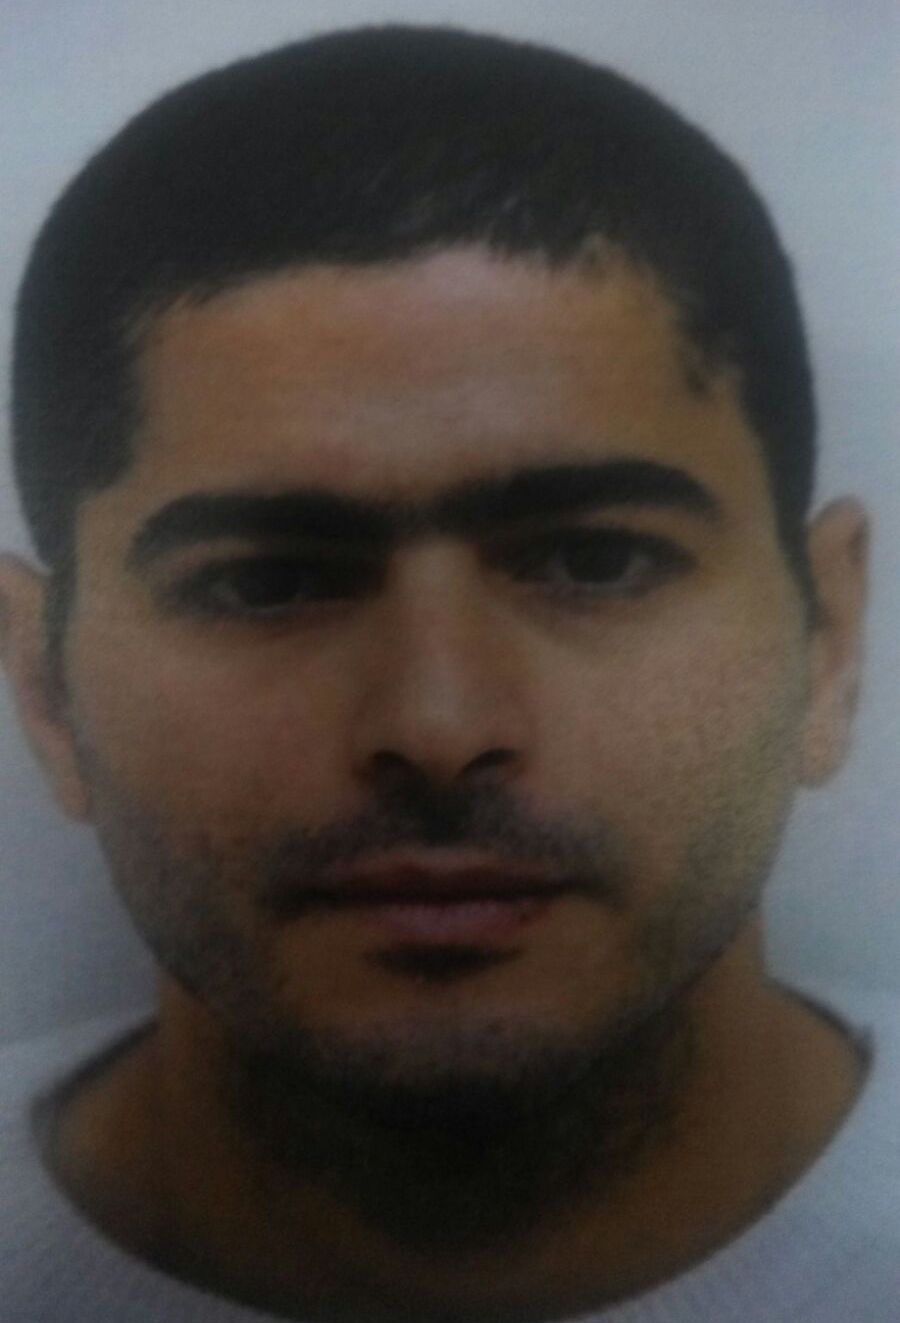 Nashat Milhem is accused of killing two people in central Tel Aviv on Friday. (Israel Police)